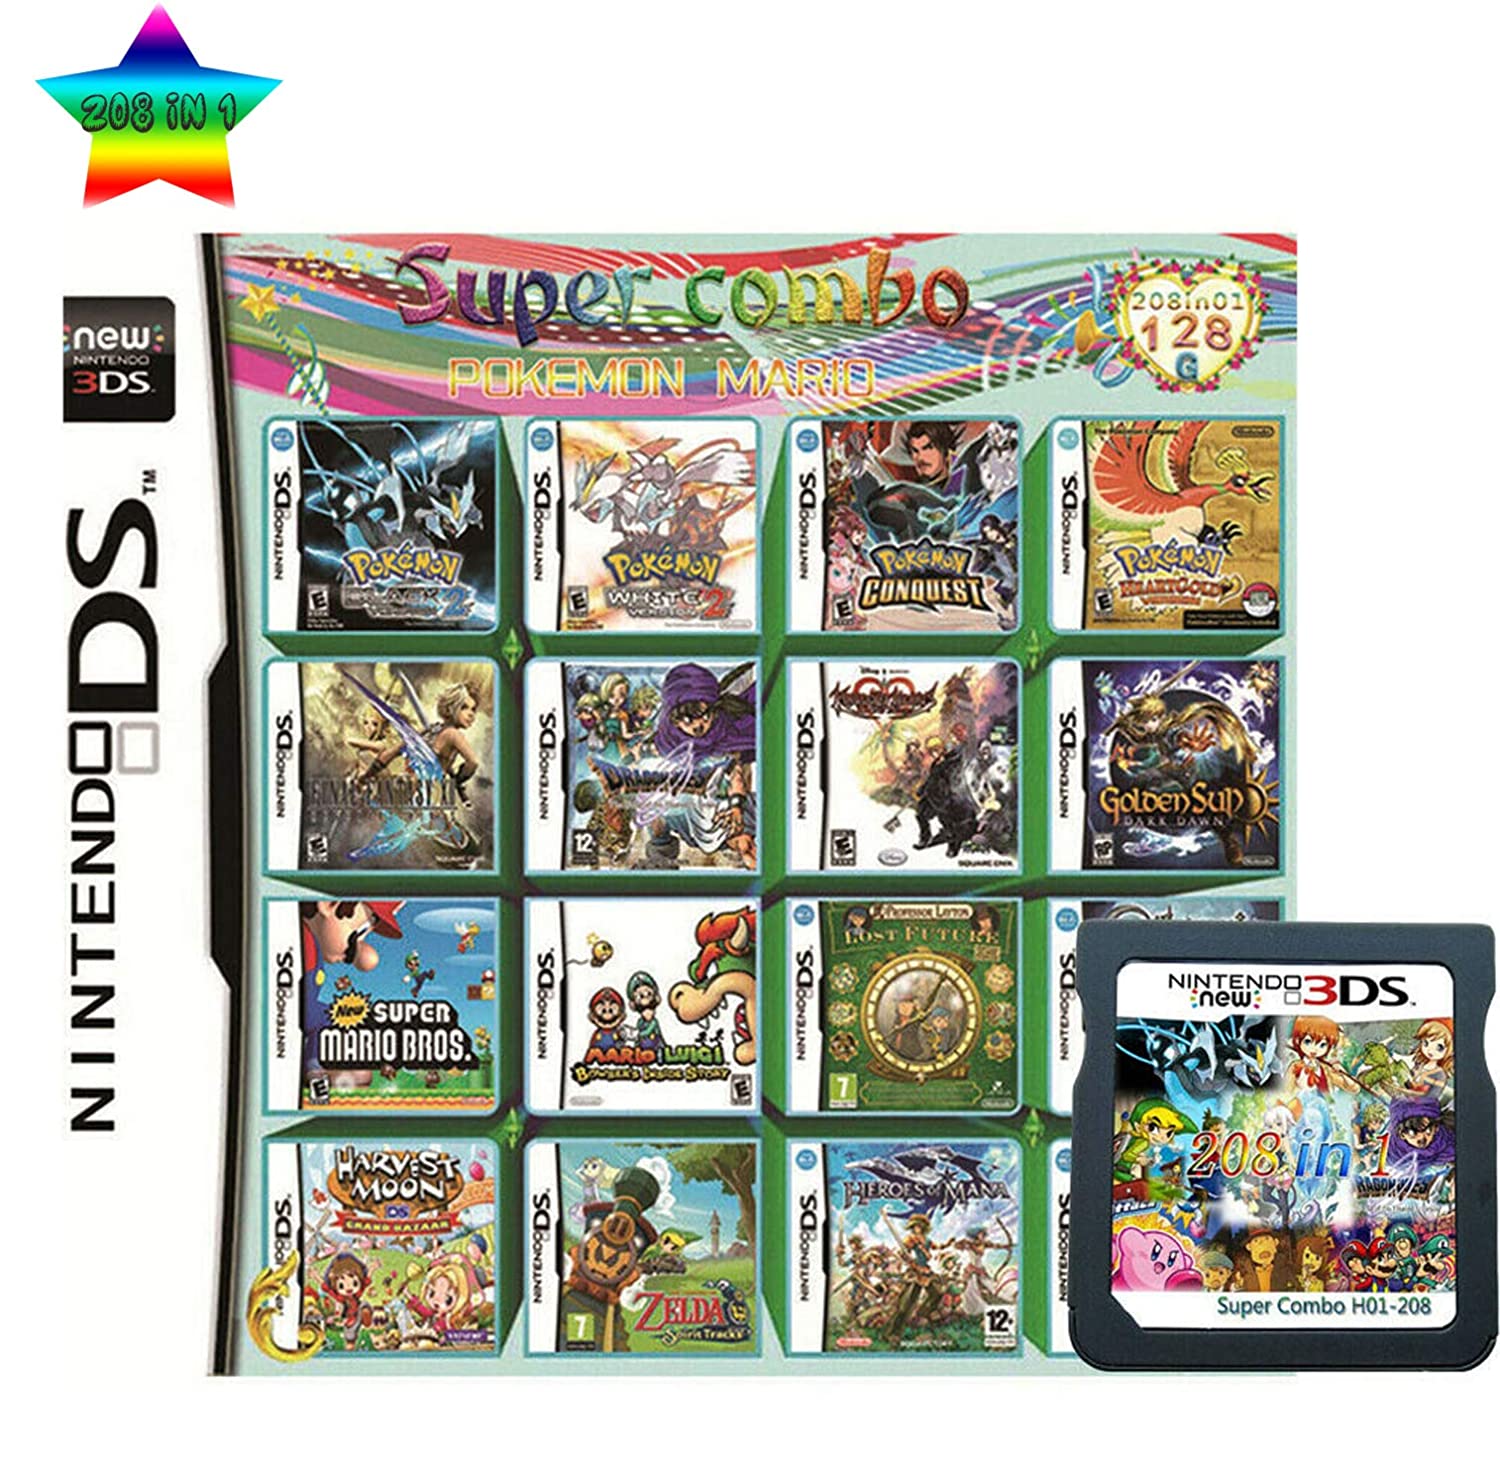 Price History Review On 8 In 1 Multi Cart Super Combo Video Games Cartridge Card Cart Pokemon For Nintendo Ds Nds 3ds Xl 3dsxl 2ds Ndsl Ndsi Aliexpress Seller